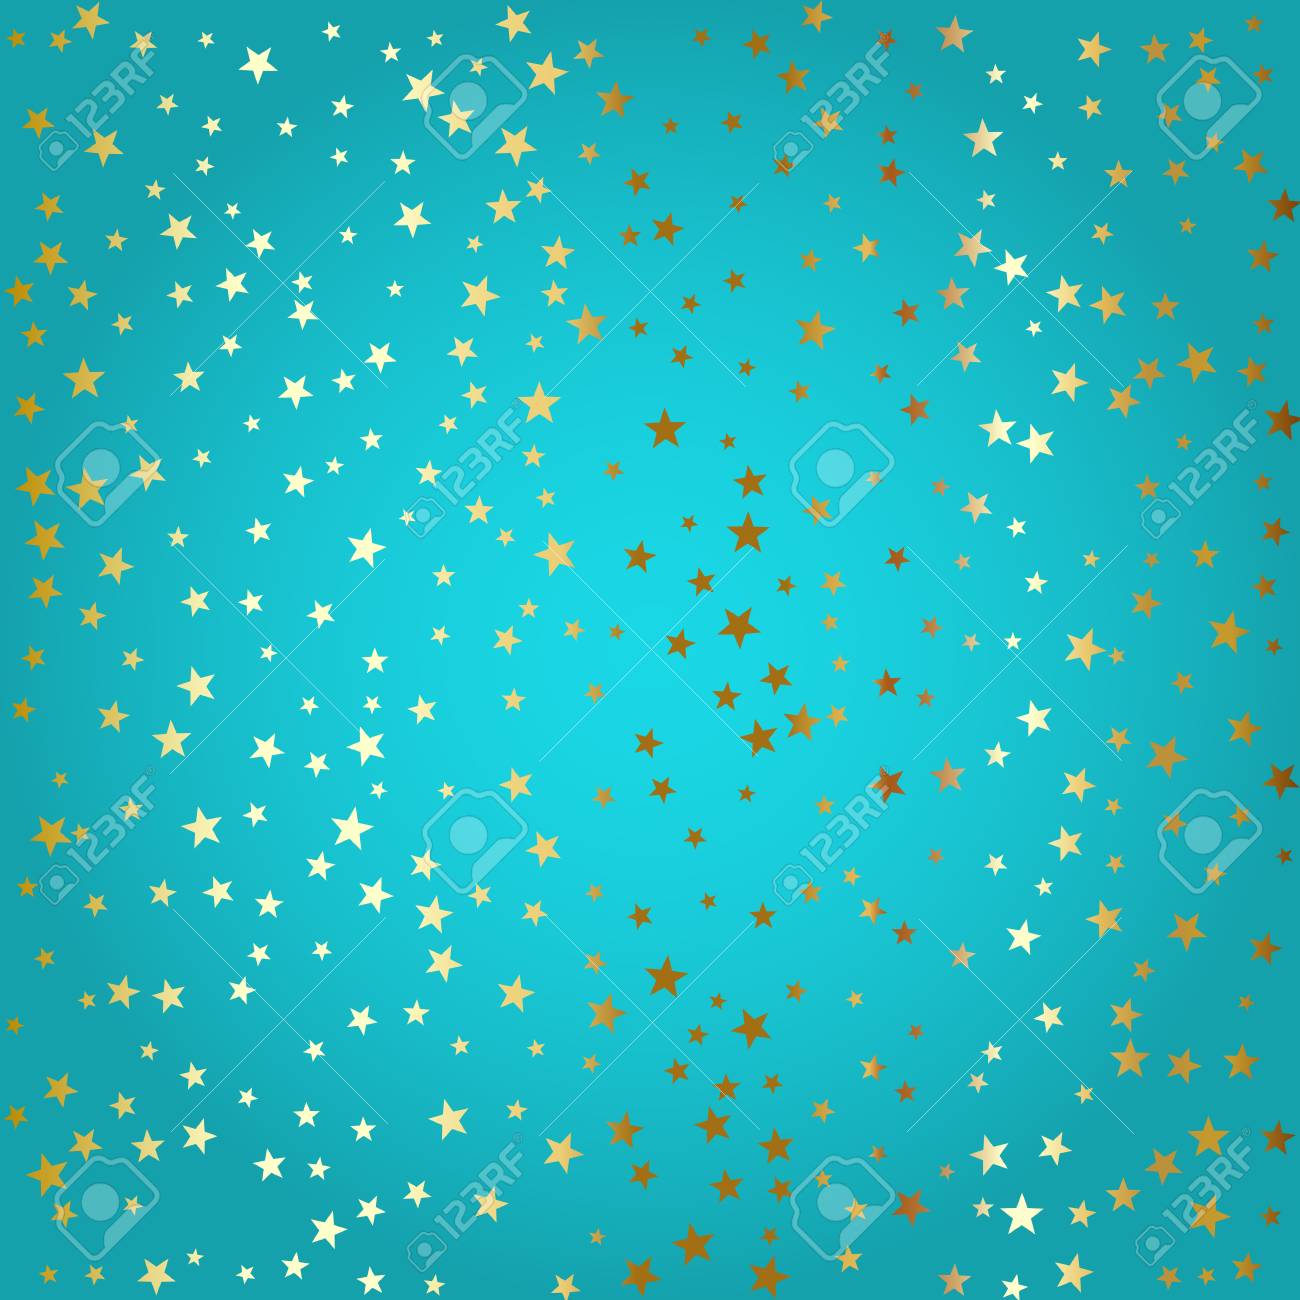 Starry Pattern Background In Gold And Teal Colours Stock Photo 1300x1300